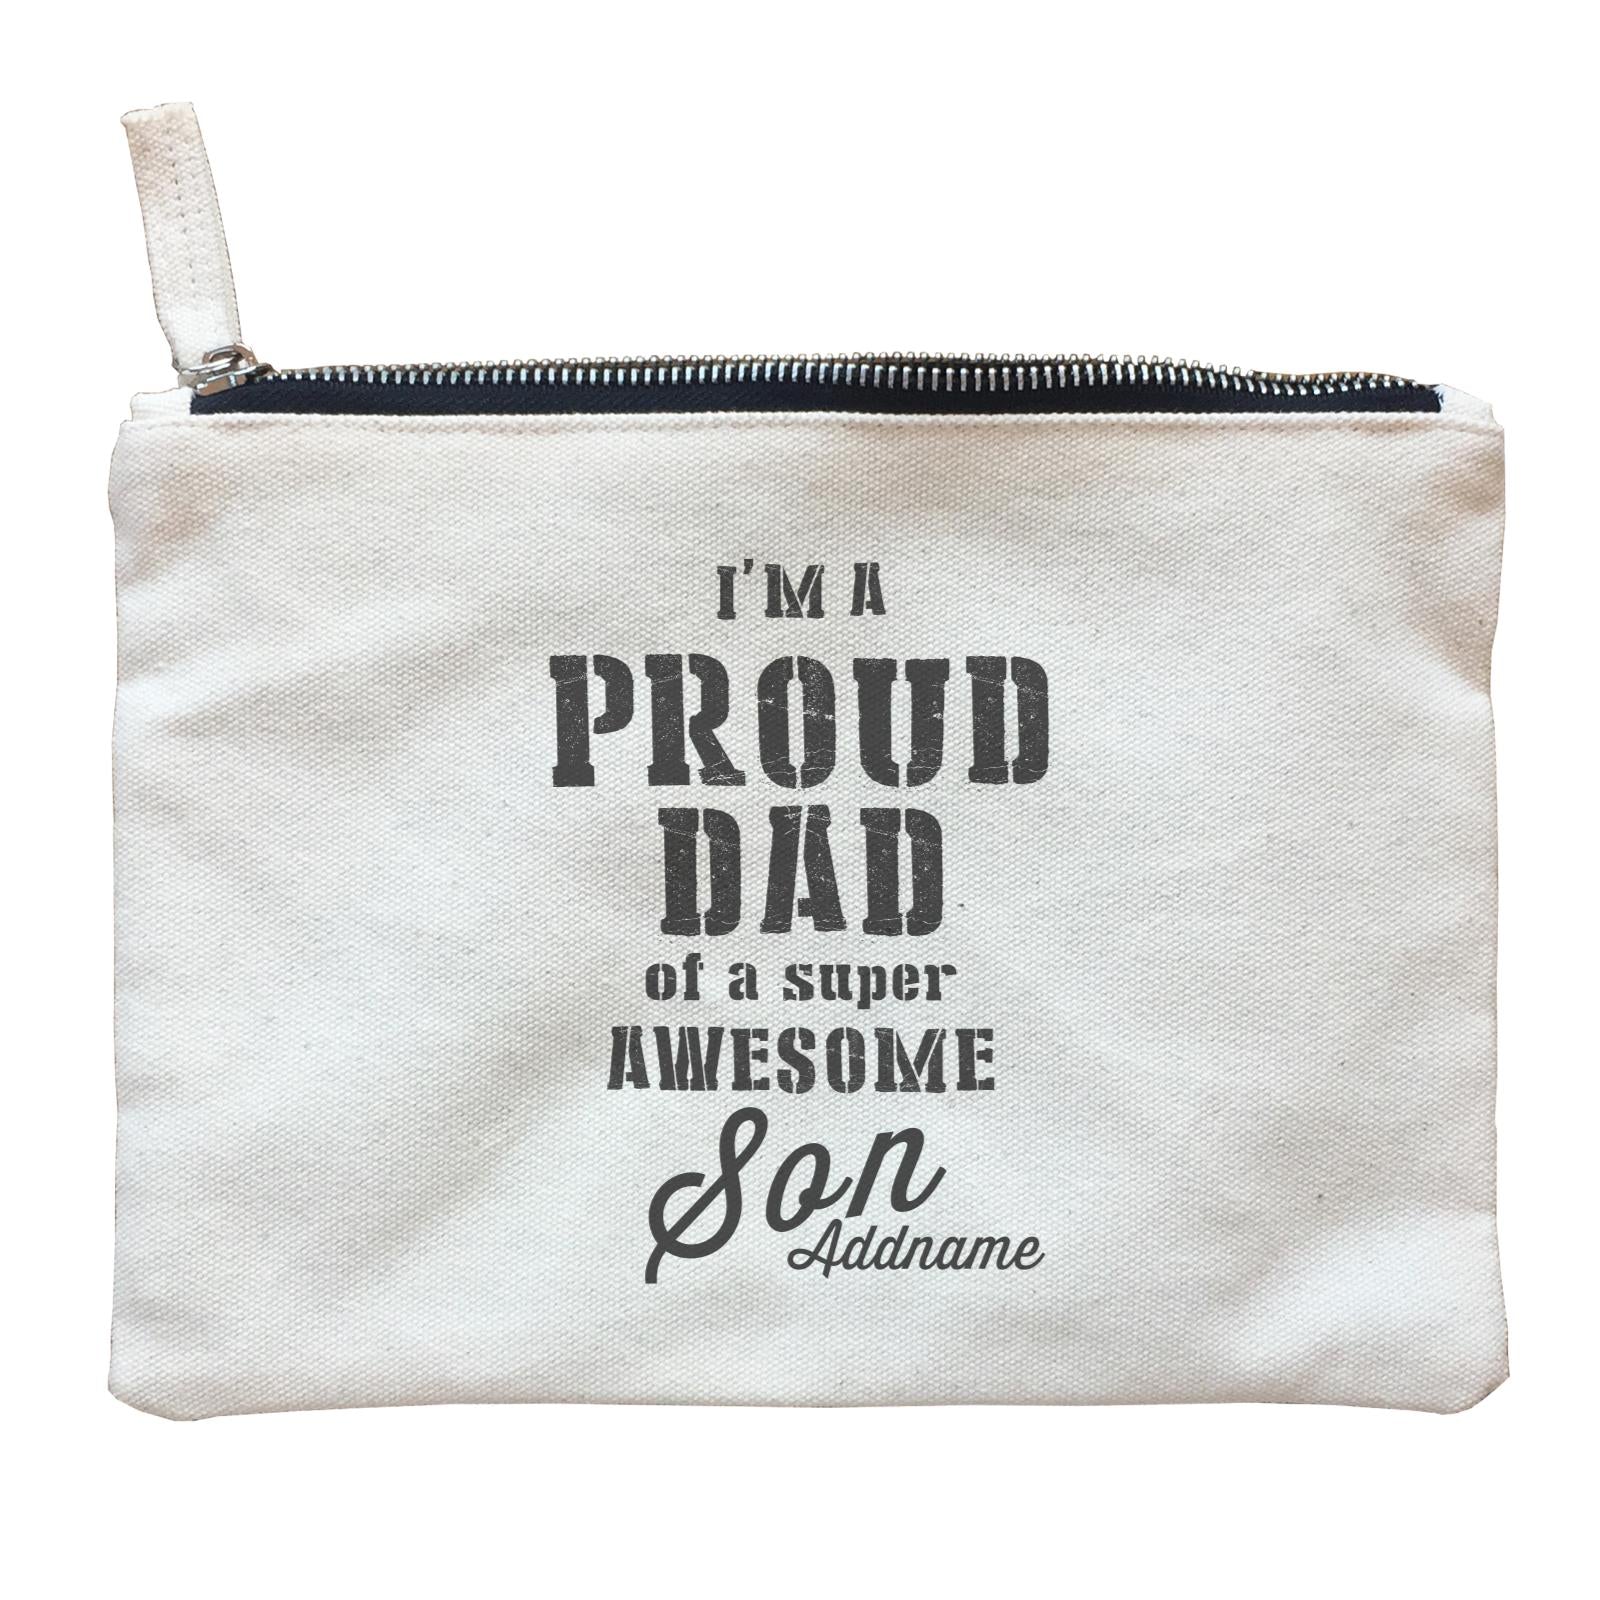 Proud Family Im A Proud Dad Of A Super Awesome Son Addname Zipper Pouch